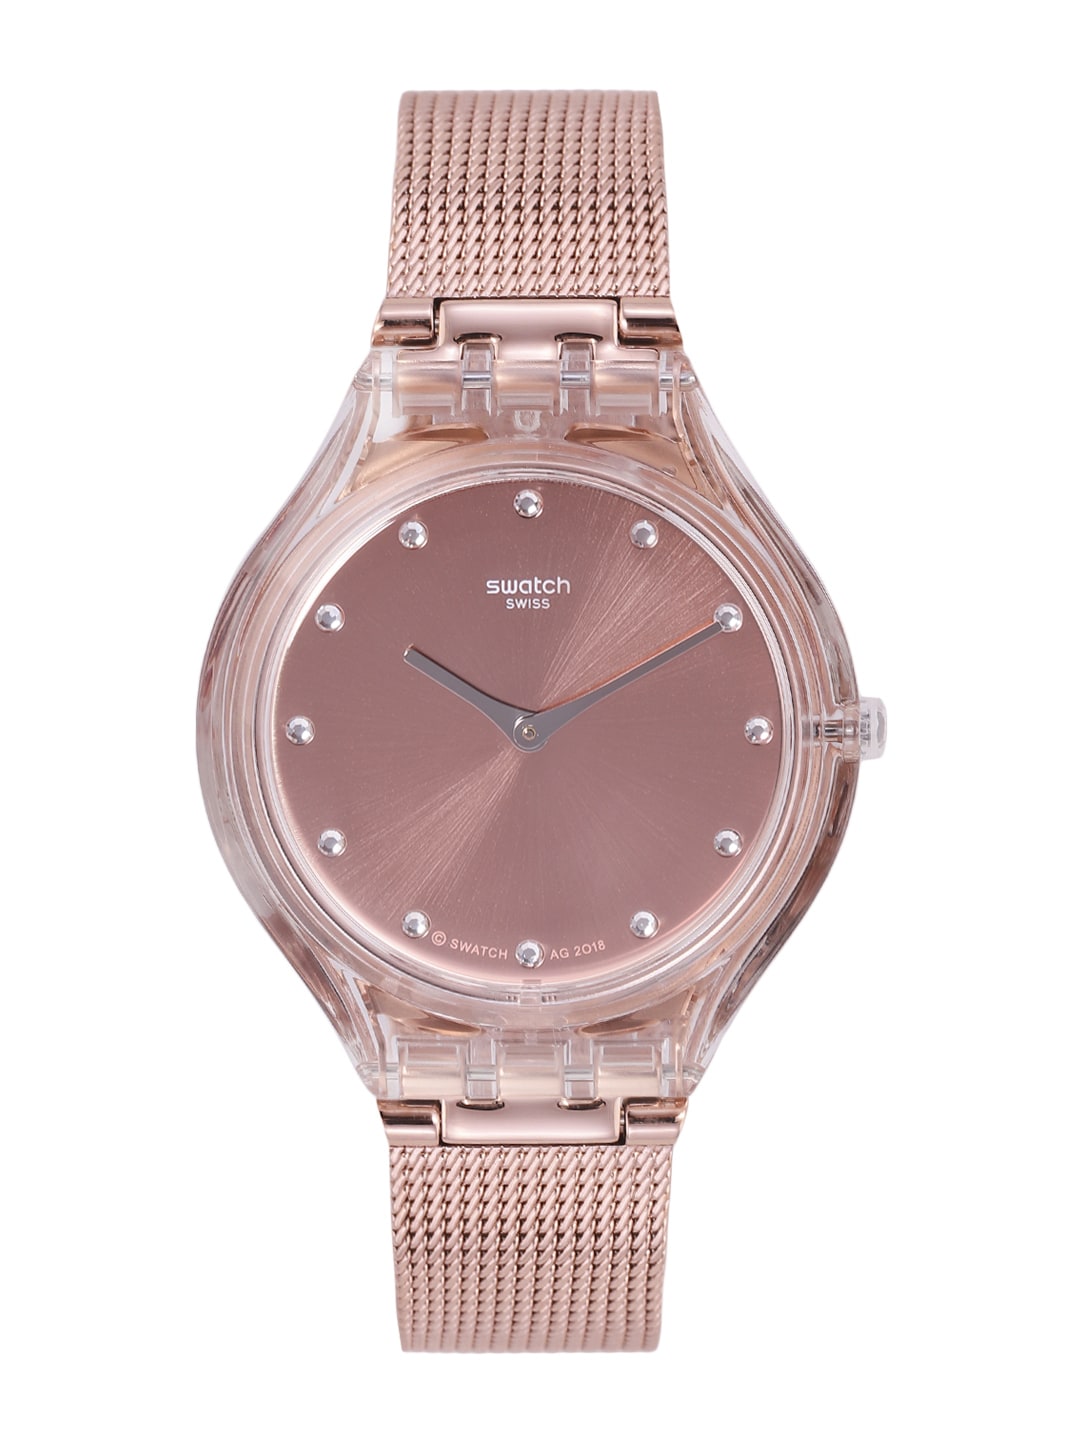 Swatch Skin Unisex Rose Gold Water Resistant Analogue Watch SVOK107M Price in India